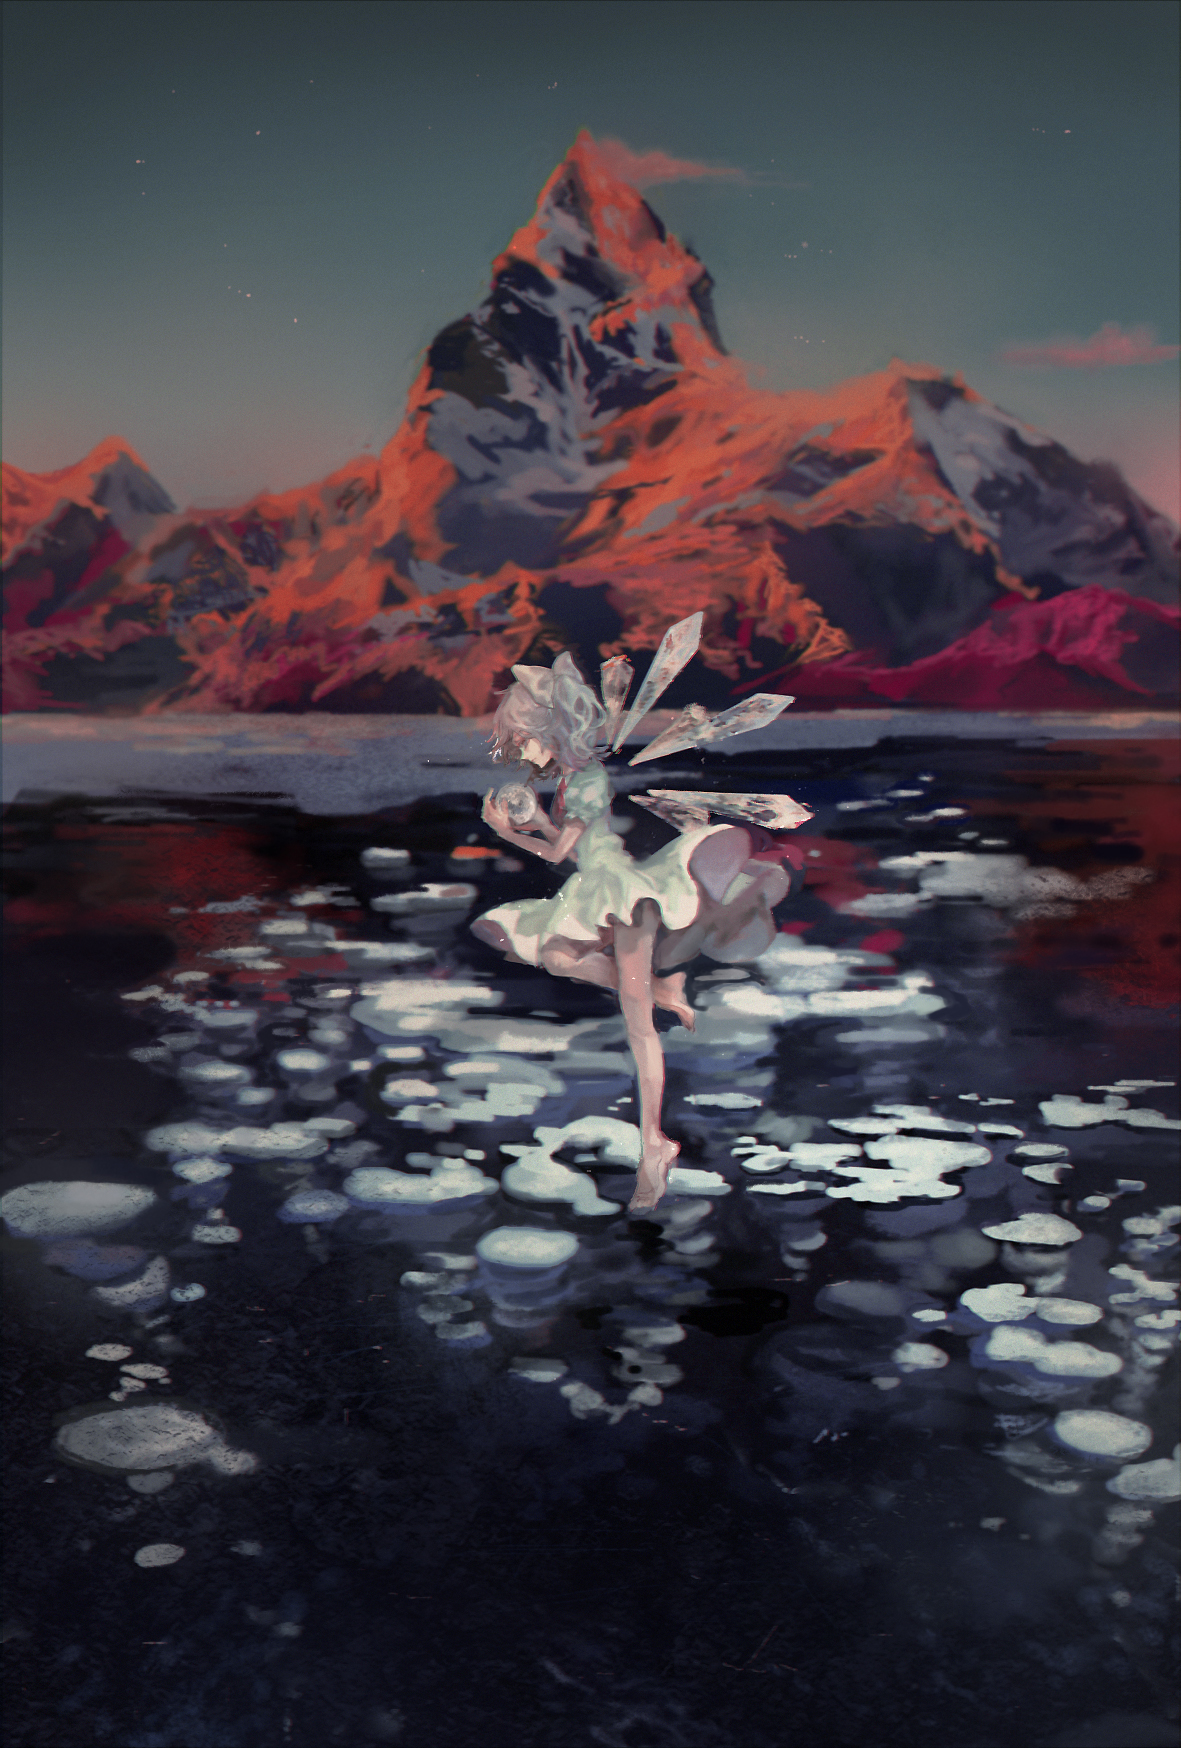 Anime 1181x1748 Touhou Cirno scenery anaglyphic portrait display lake mountain view wings anime girls